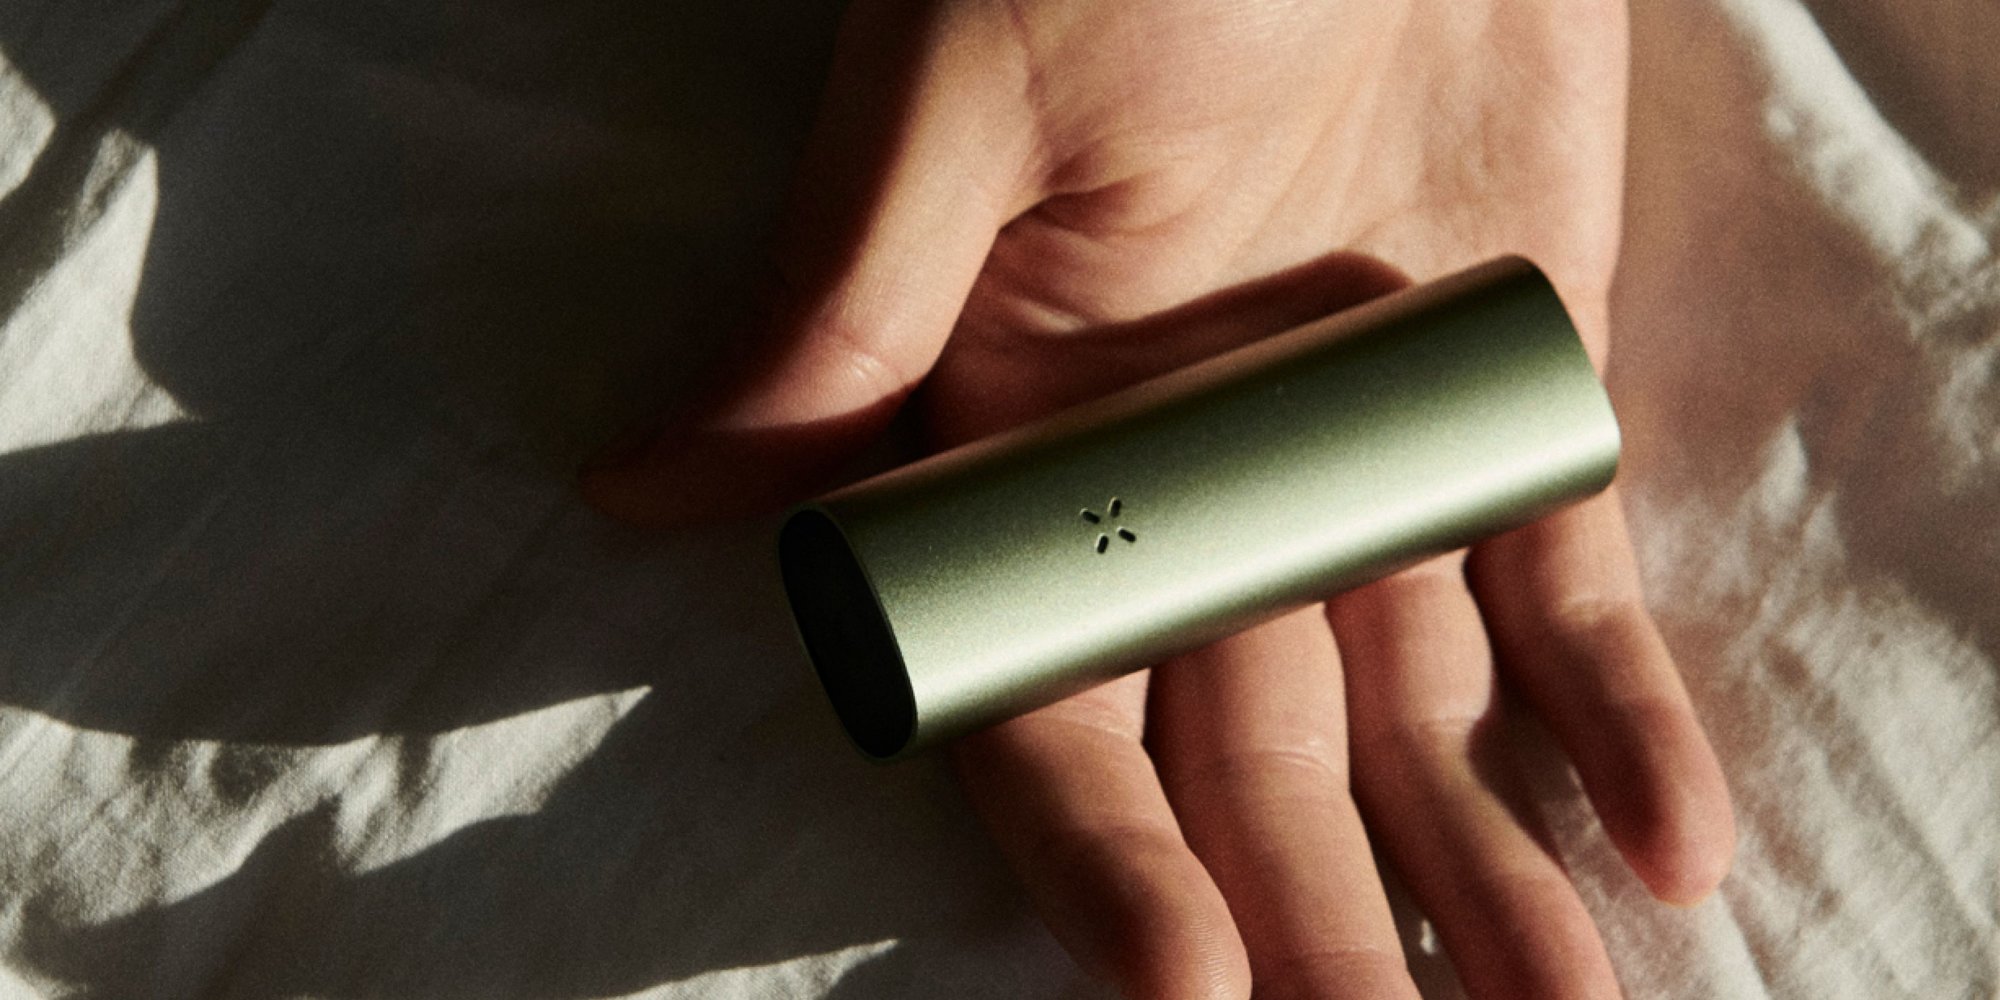 Holding a PAX vaporizer in the palm of your hand